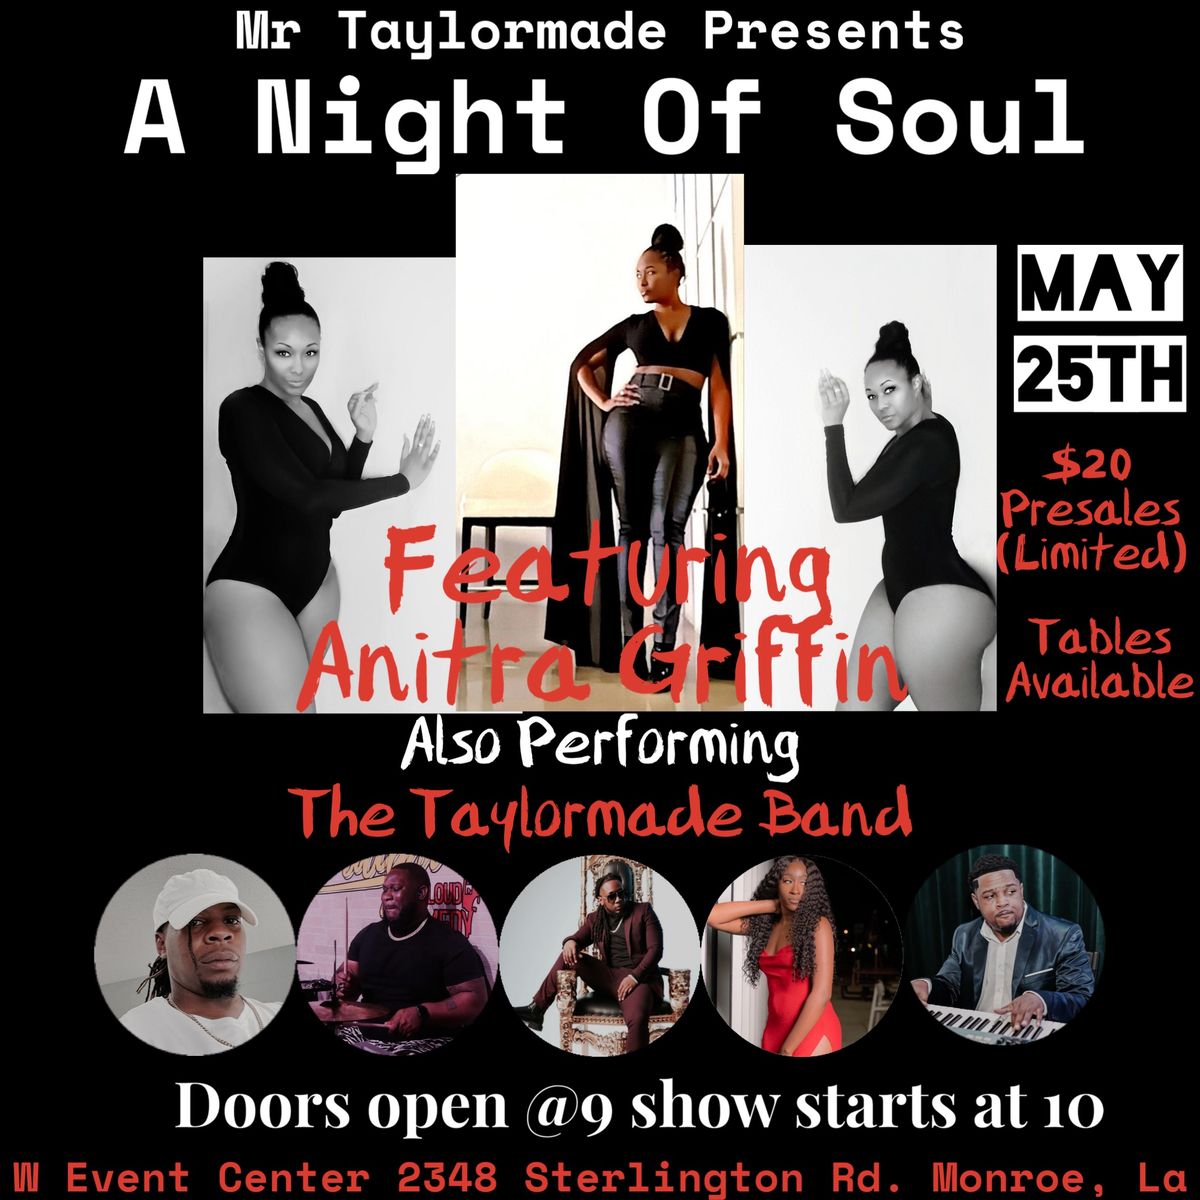 A Night of Soul feat. Anitra Griffin and The Taylormade Band